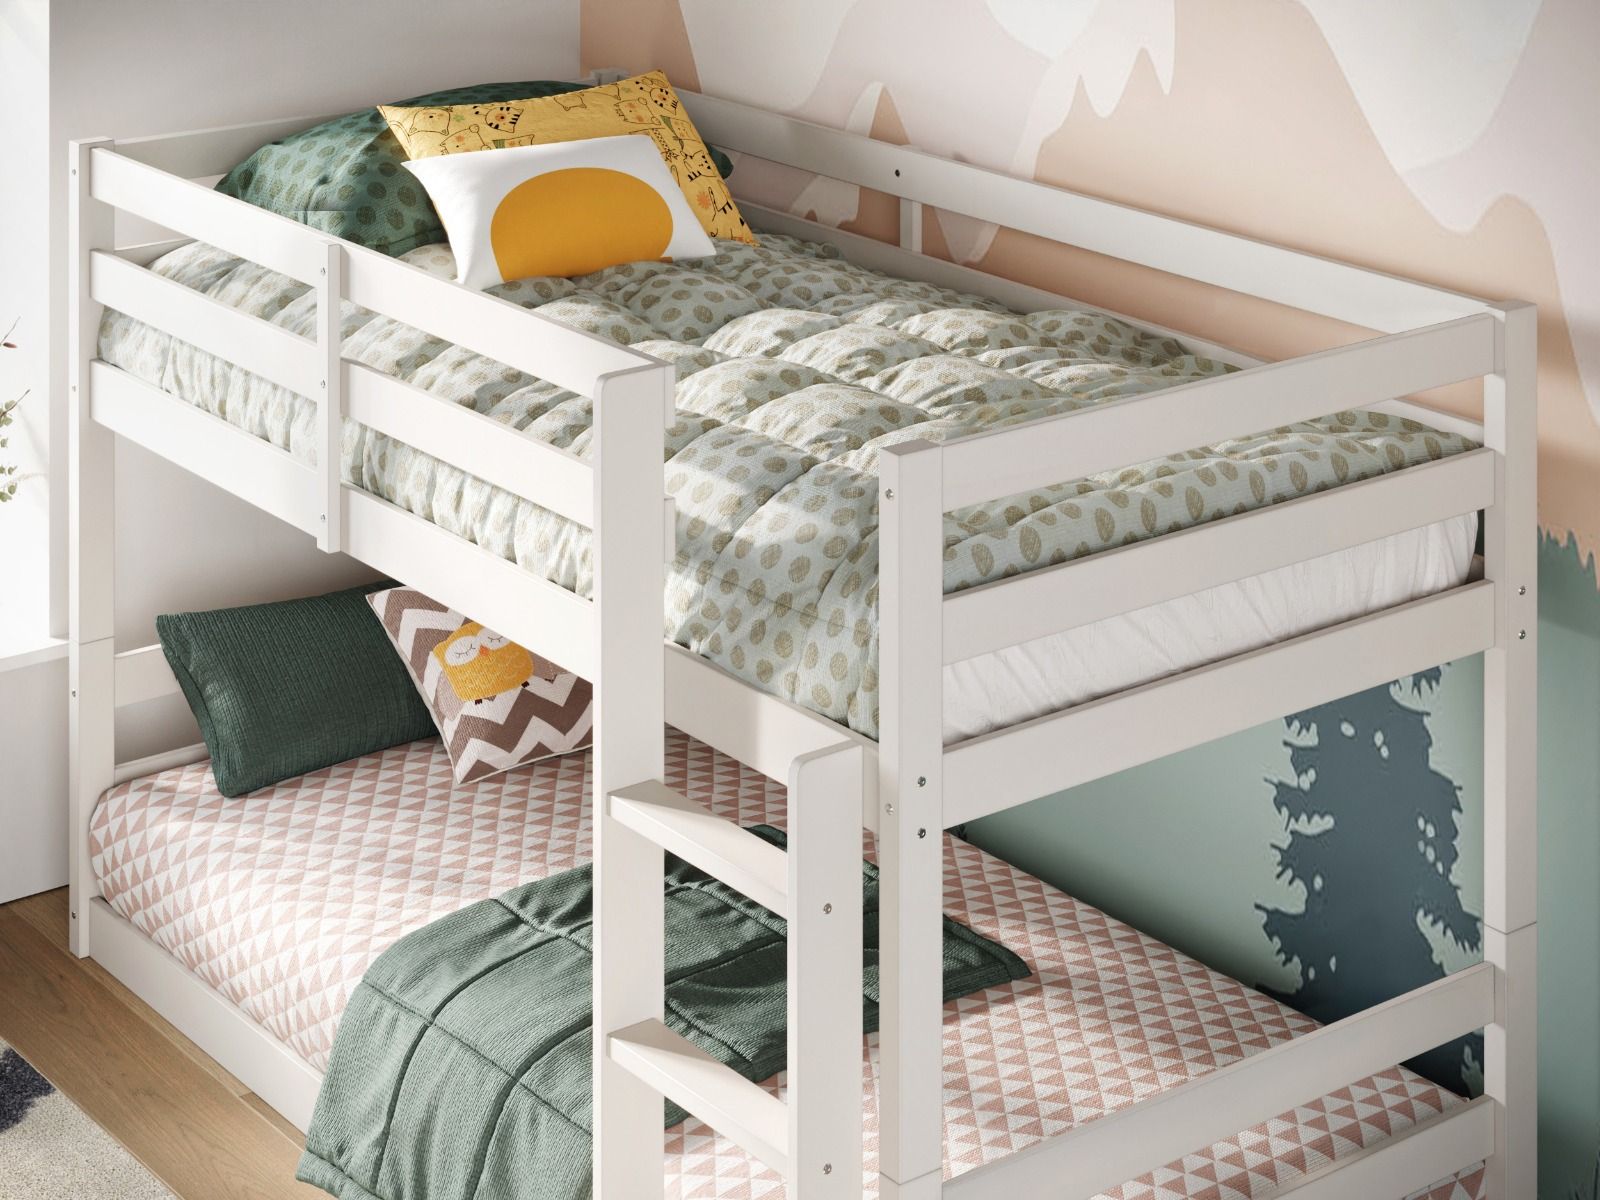 Flair Shasha Low Wooden Bunk Bed - White